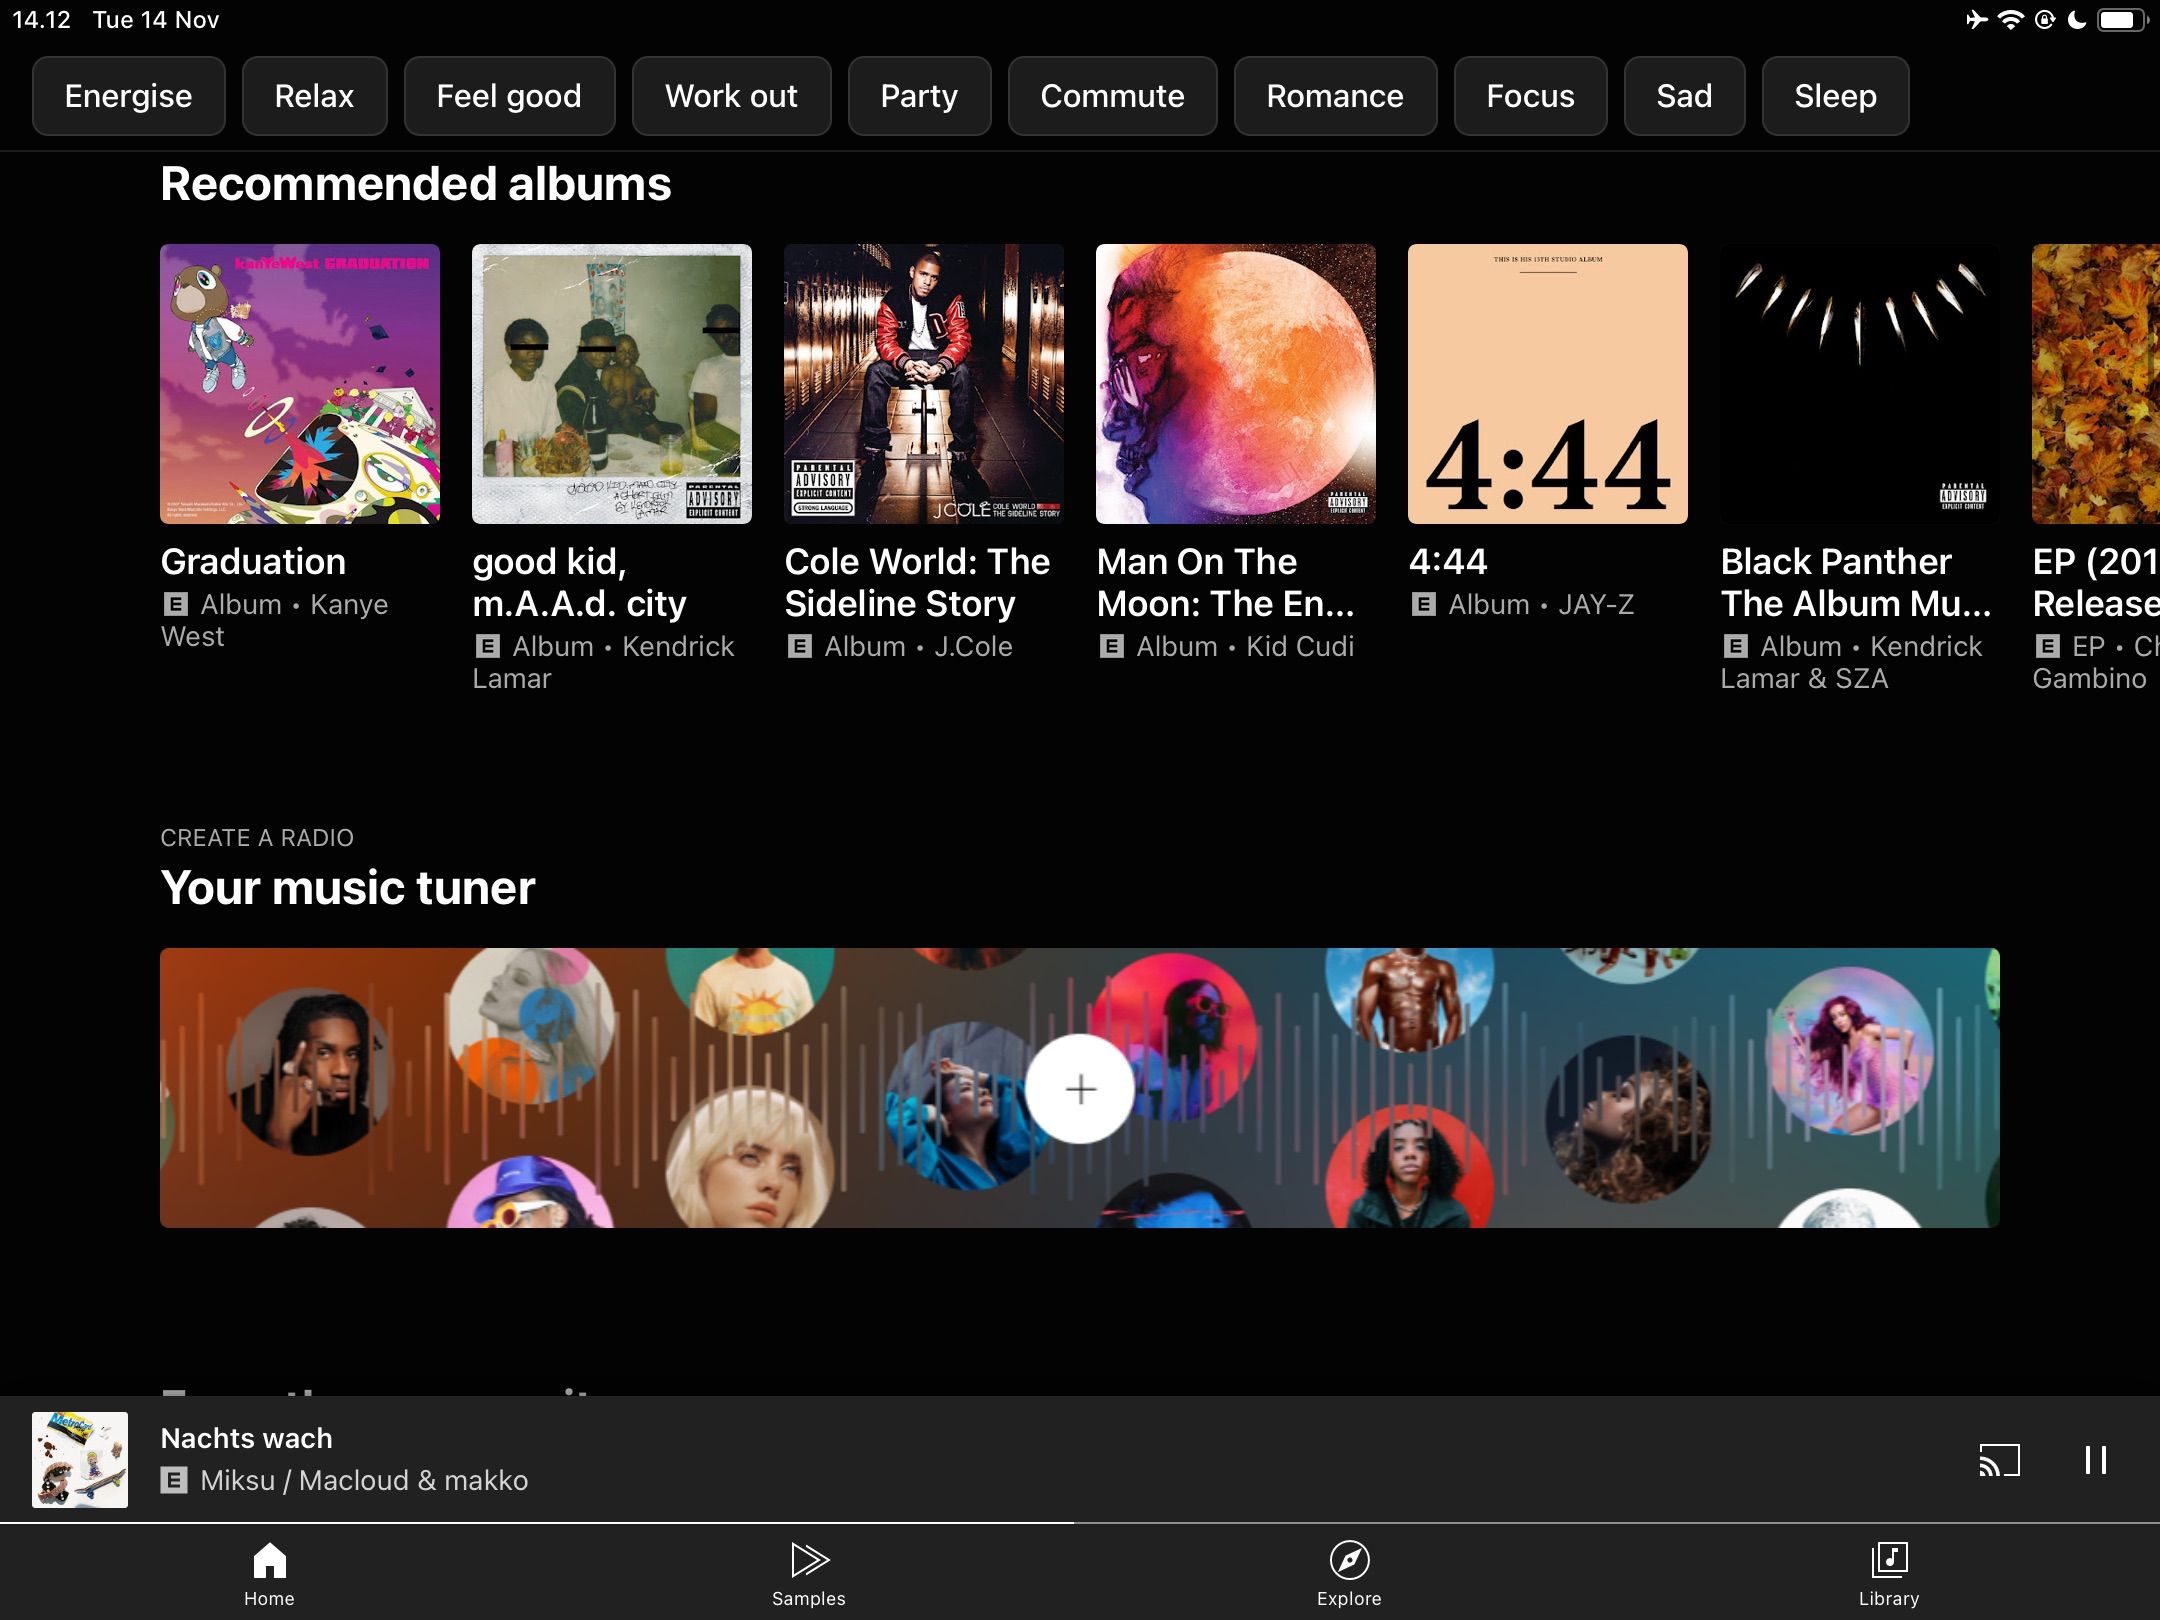 The YouTube Music App Interface